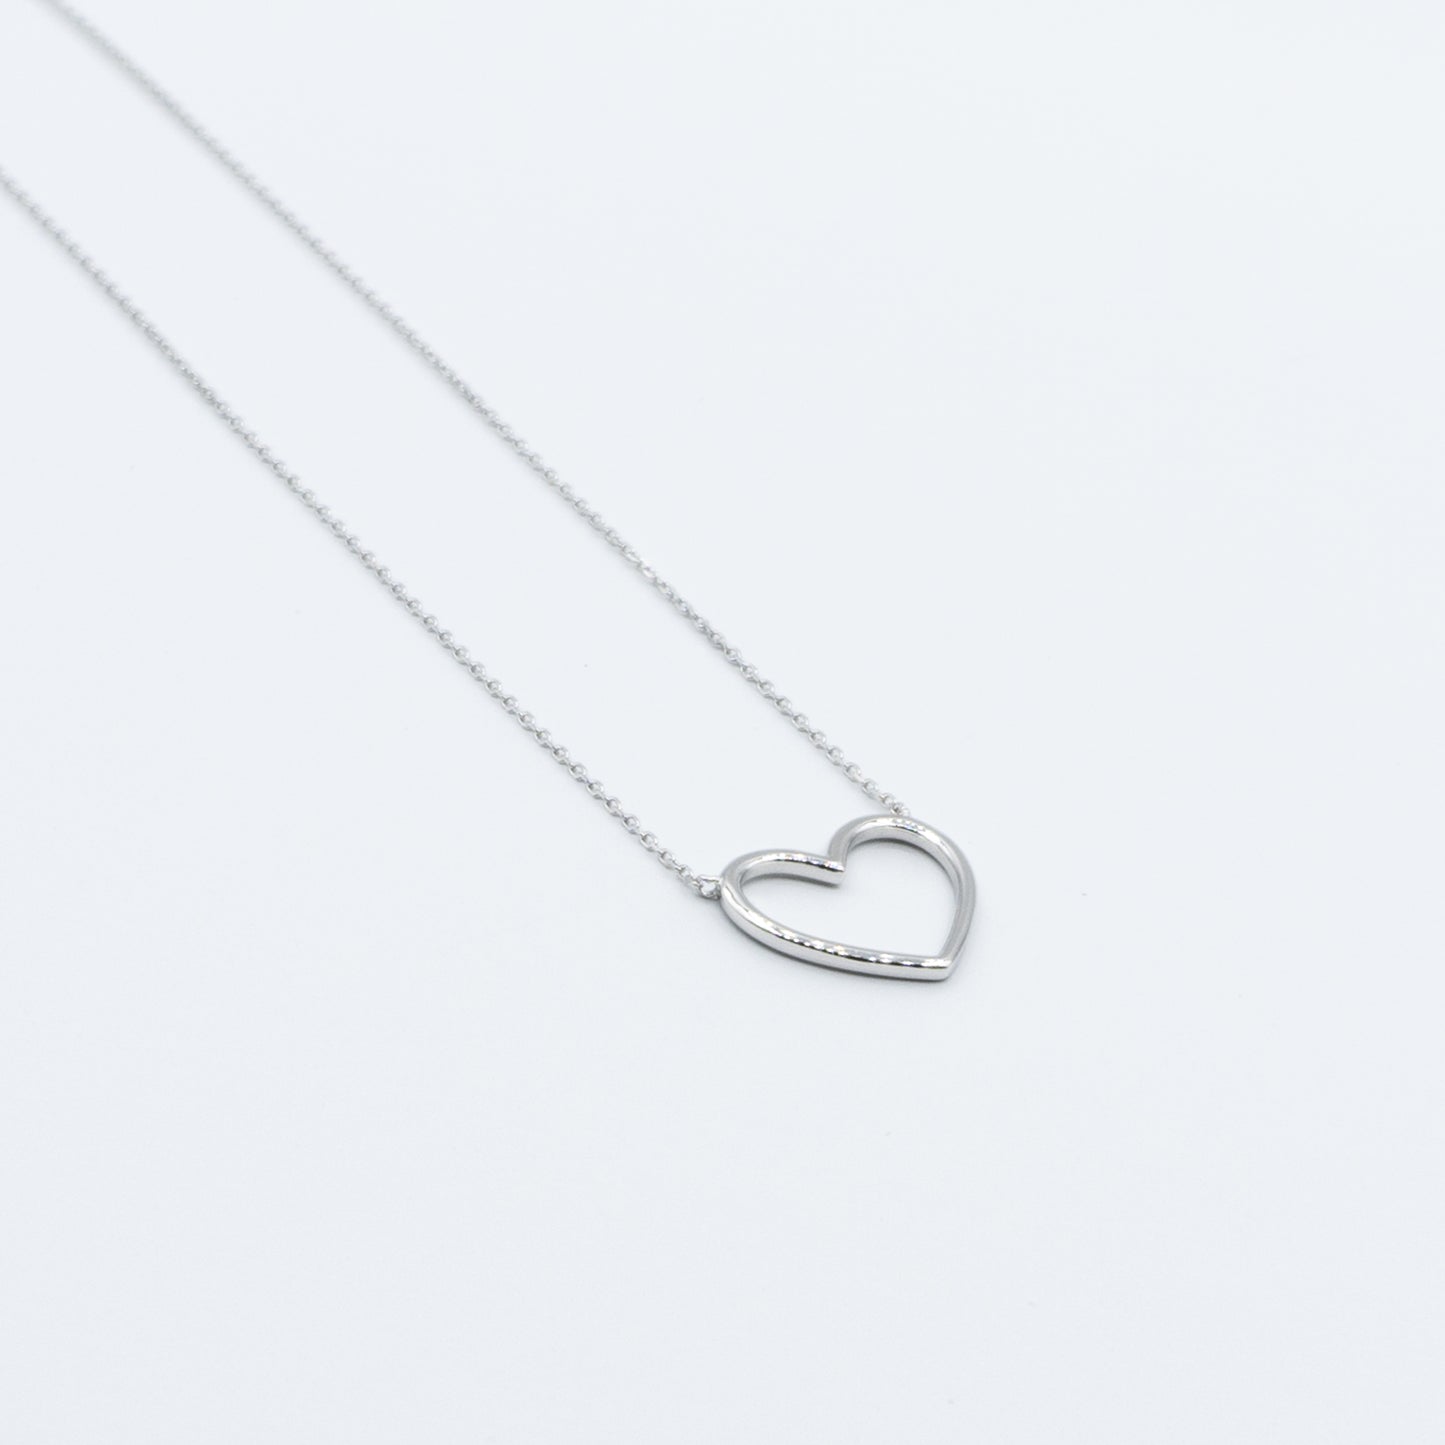 LEV sterling silver heart necklace